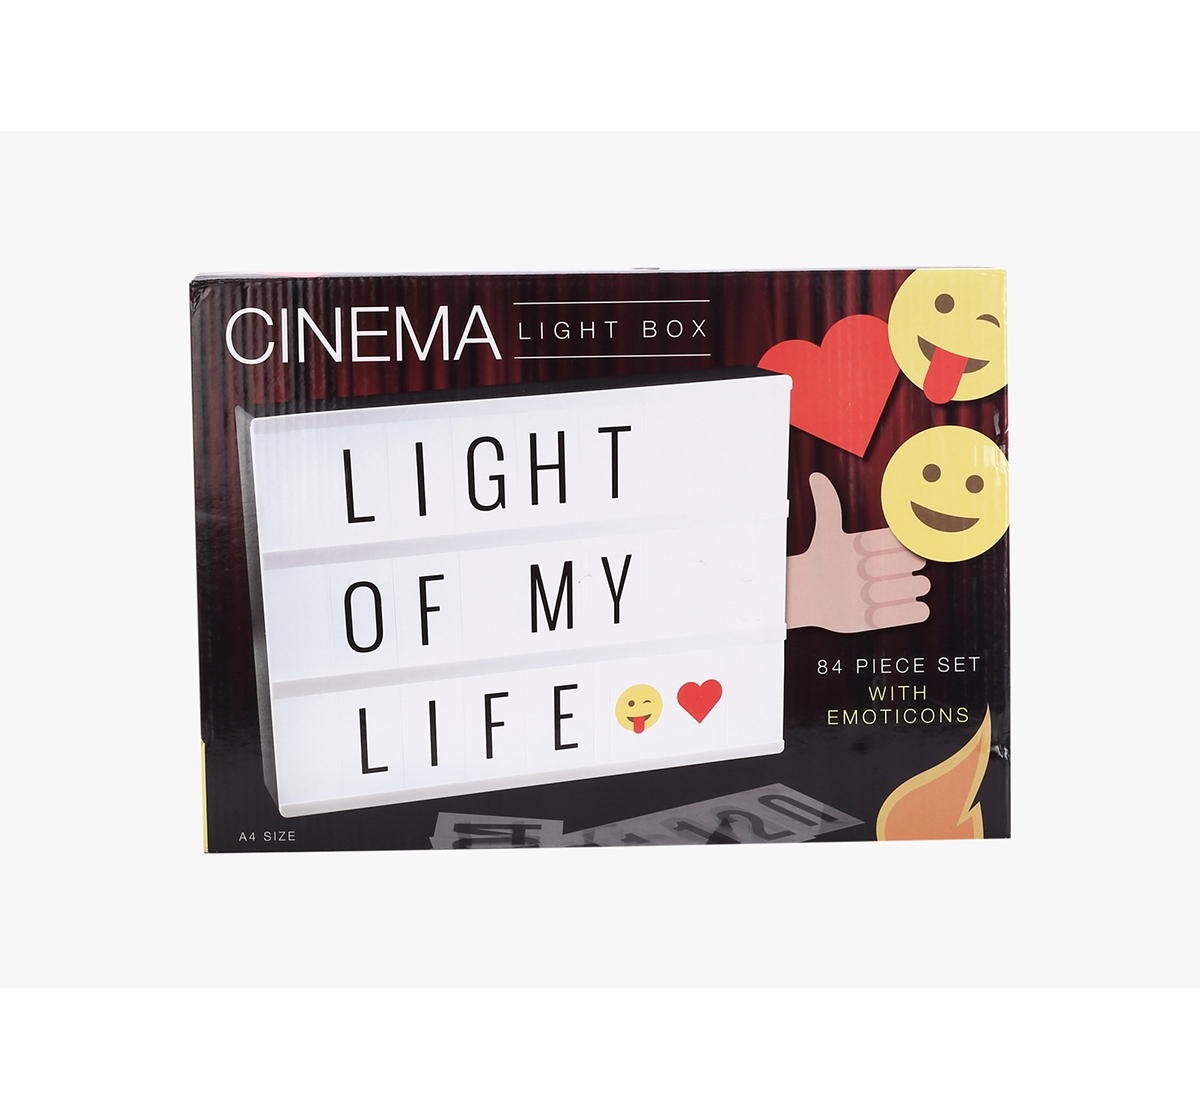 Red 5 | Red5 Cinema Light Box -Electronics Accessories for Kids age 3Y+ (White) 2